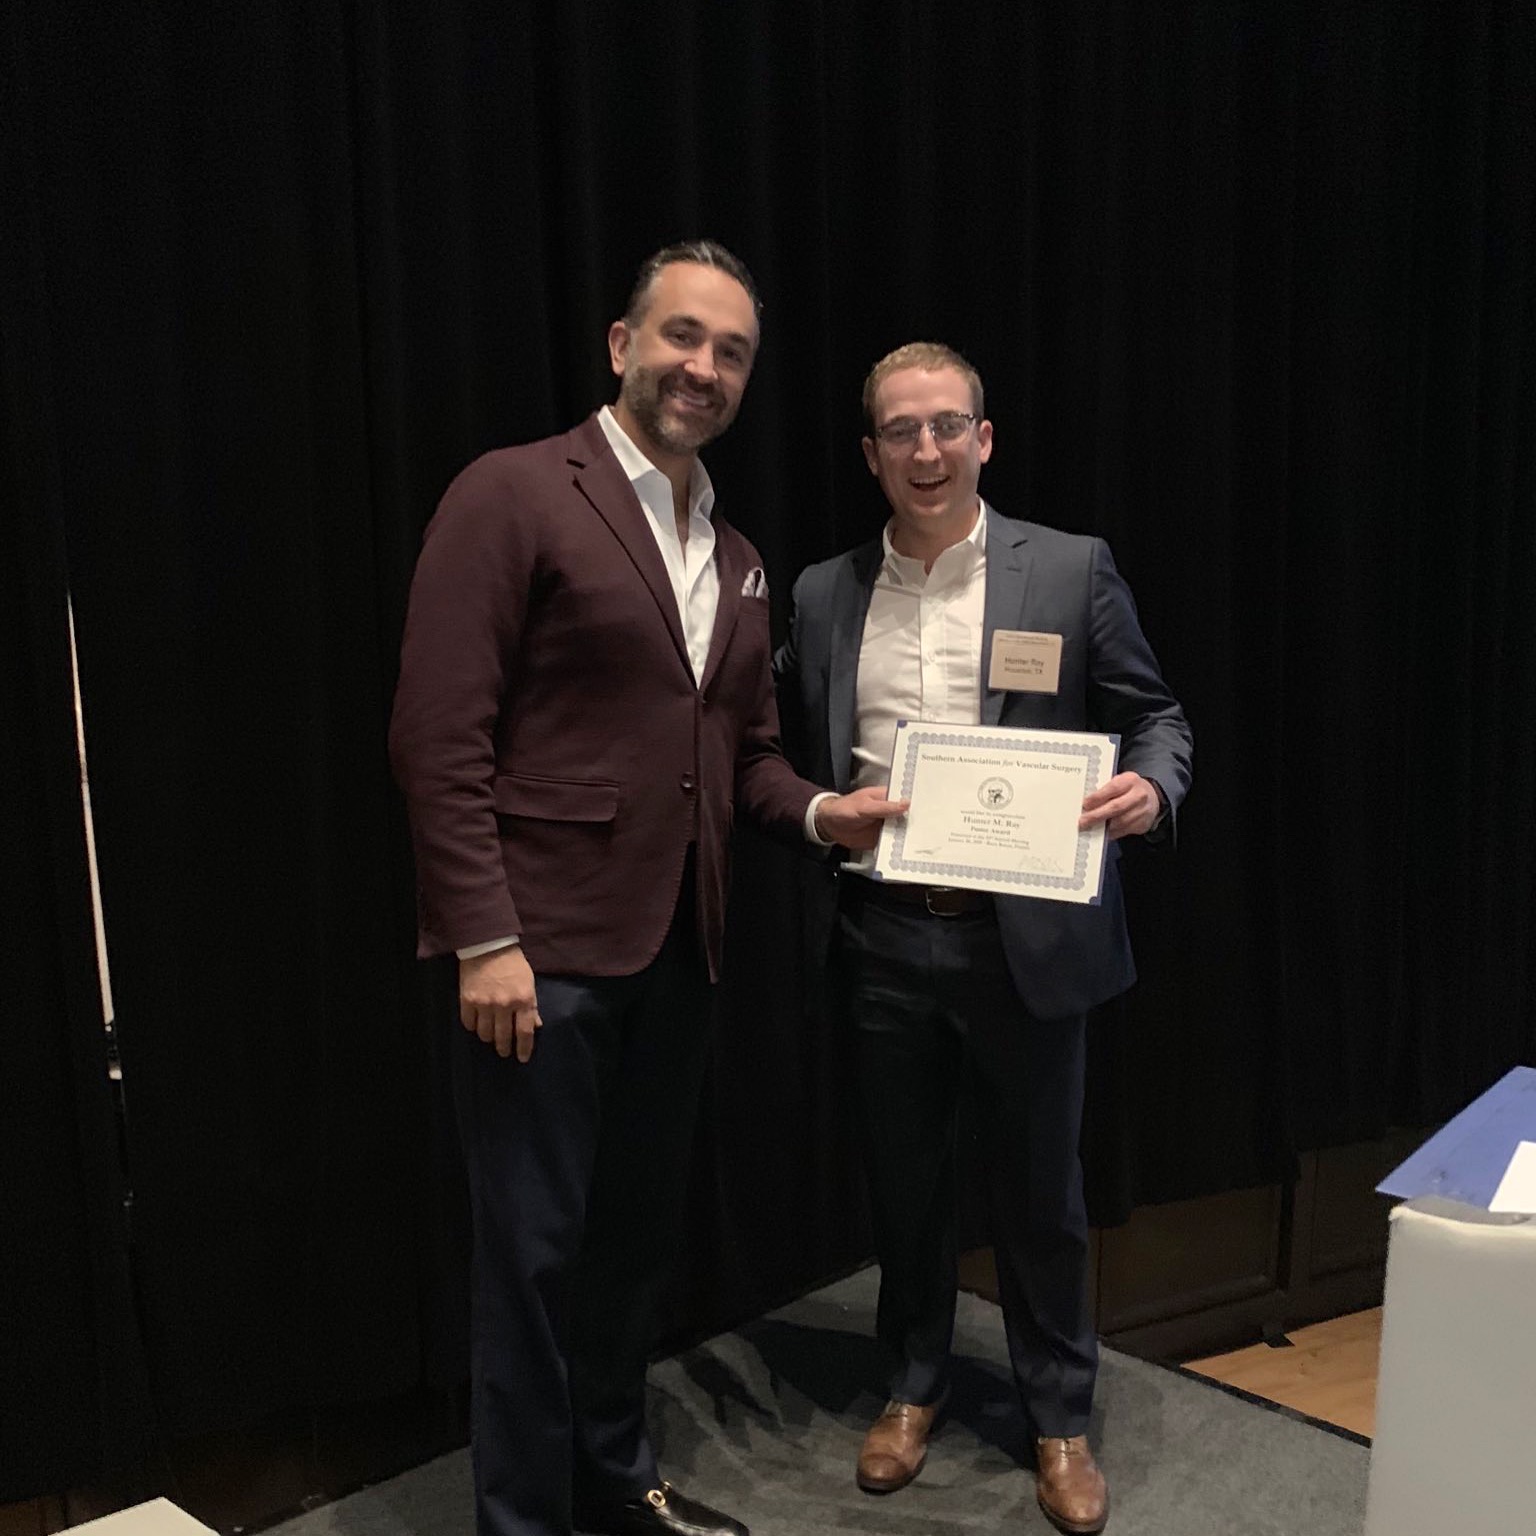 Dr. Ali Azizzadeh (right) with first place poster award winner Dr. Hunter Ray (left) at the 43rd Annual SAVS Meeting